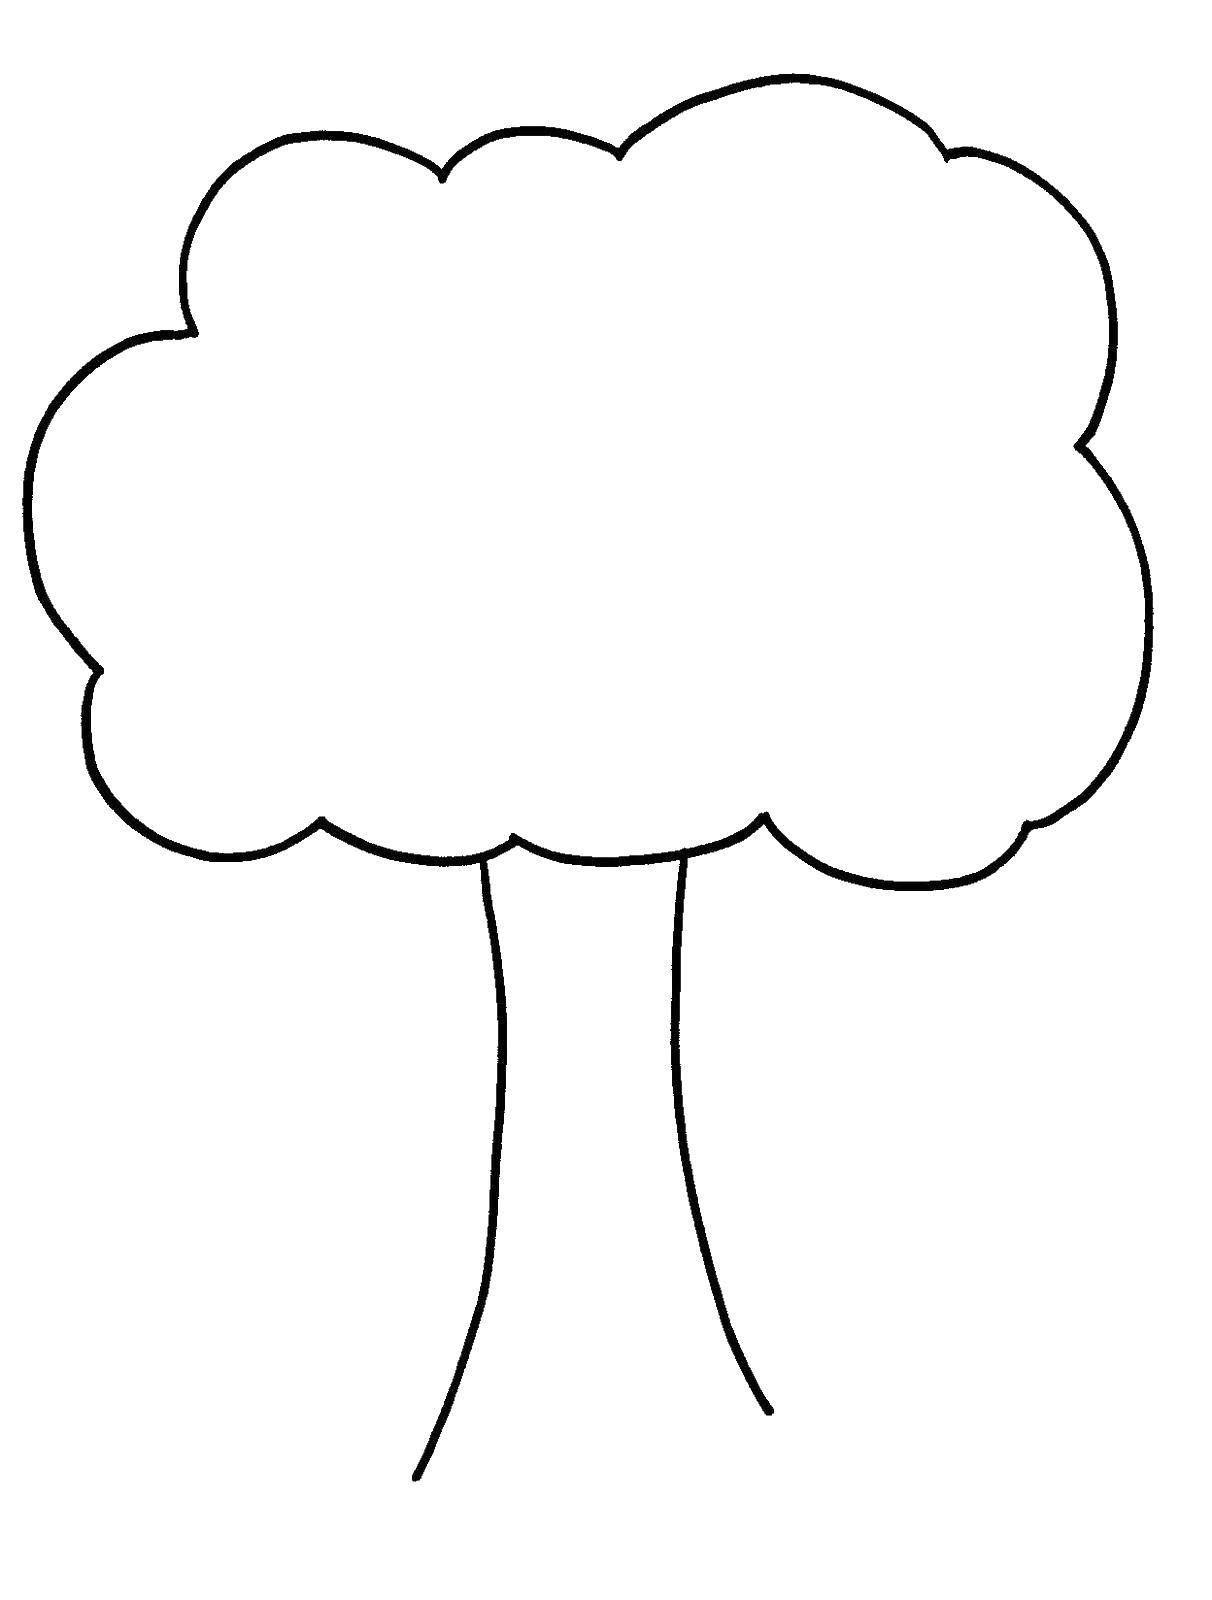 Coloring The contour tree.. Category The contour of the tree. Tags:  Trees, leaf.